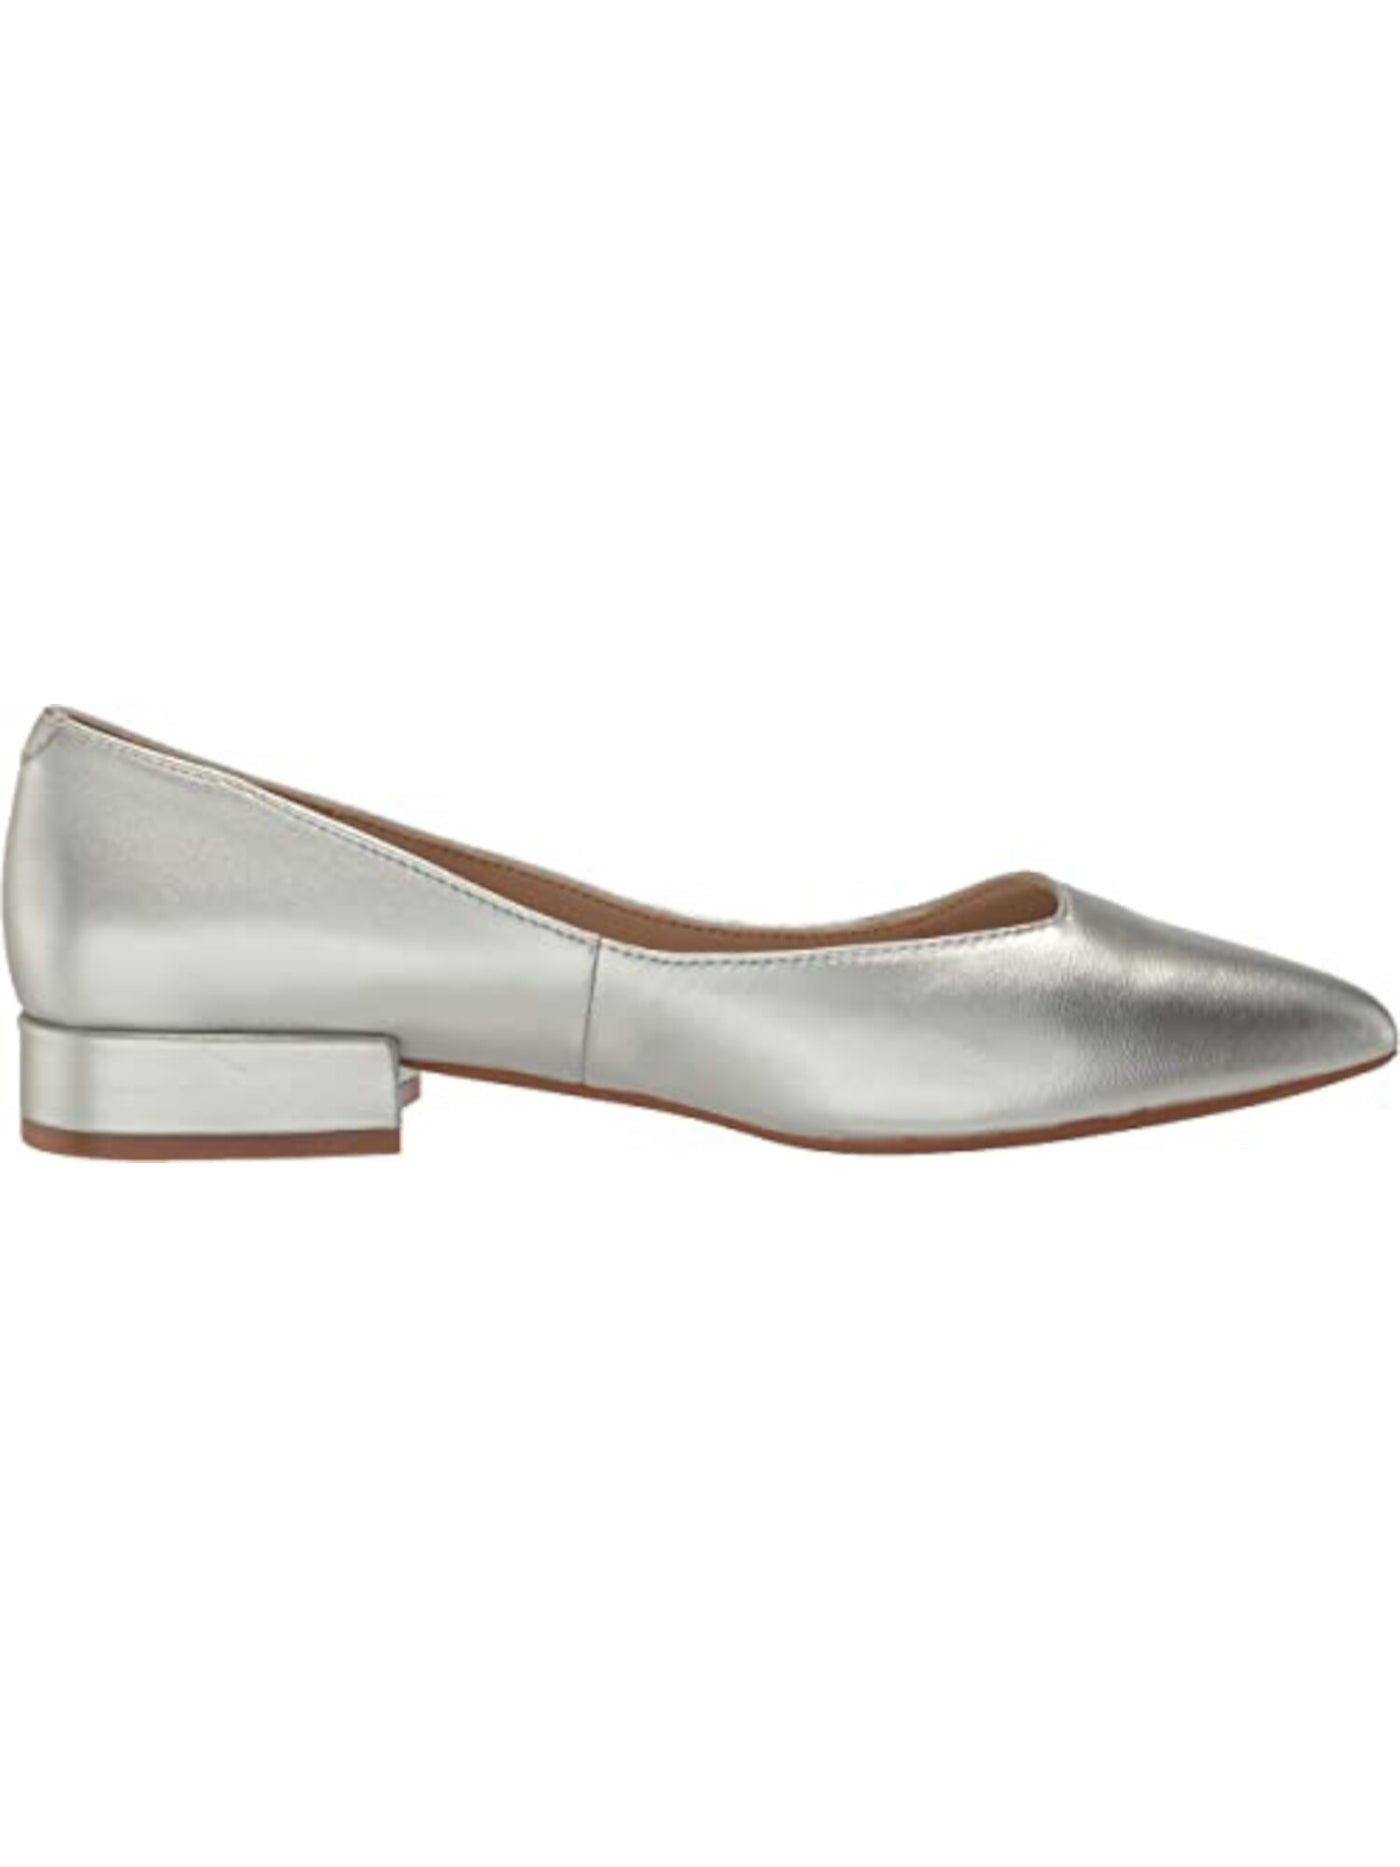 KENNETH COLE NEW YORK Womens Silver Cushioned Camelia Pointed Toe Block Heel Slip On Leather Dress Flats Shoes 6 M